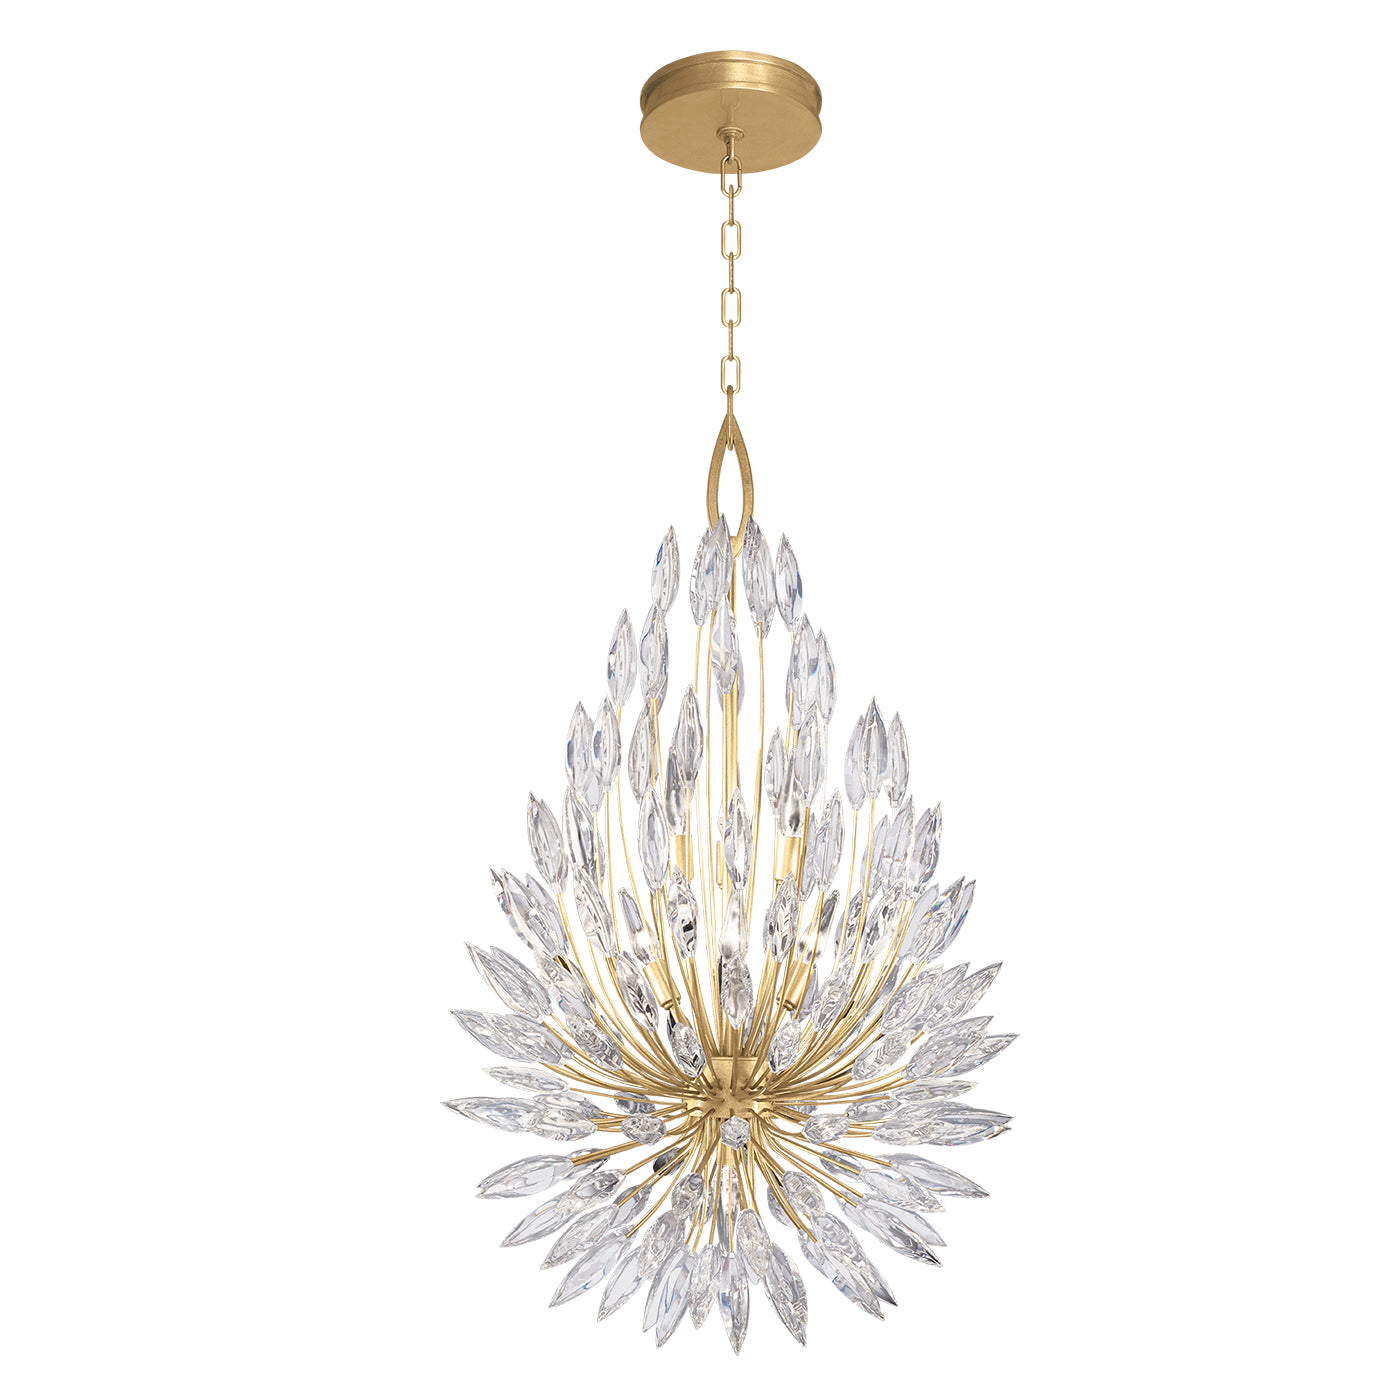 Fine Art Handcrafted Lighting Lily Buds Pendant Chandeliers Fine Art Handcrafted Lighting Gold 24 x 40 